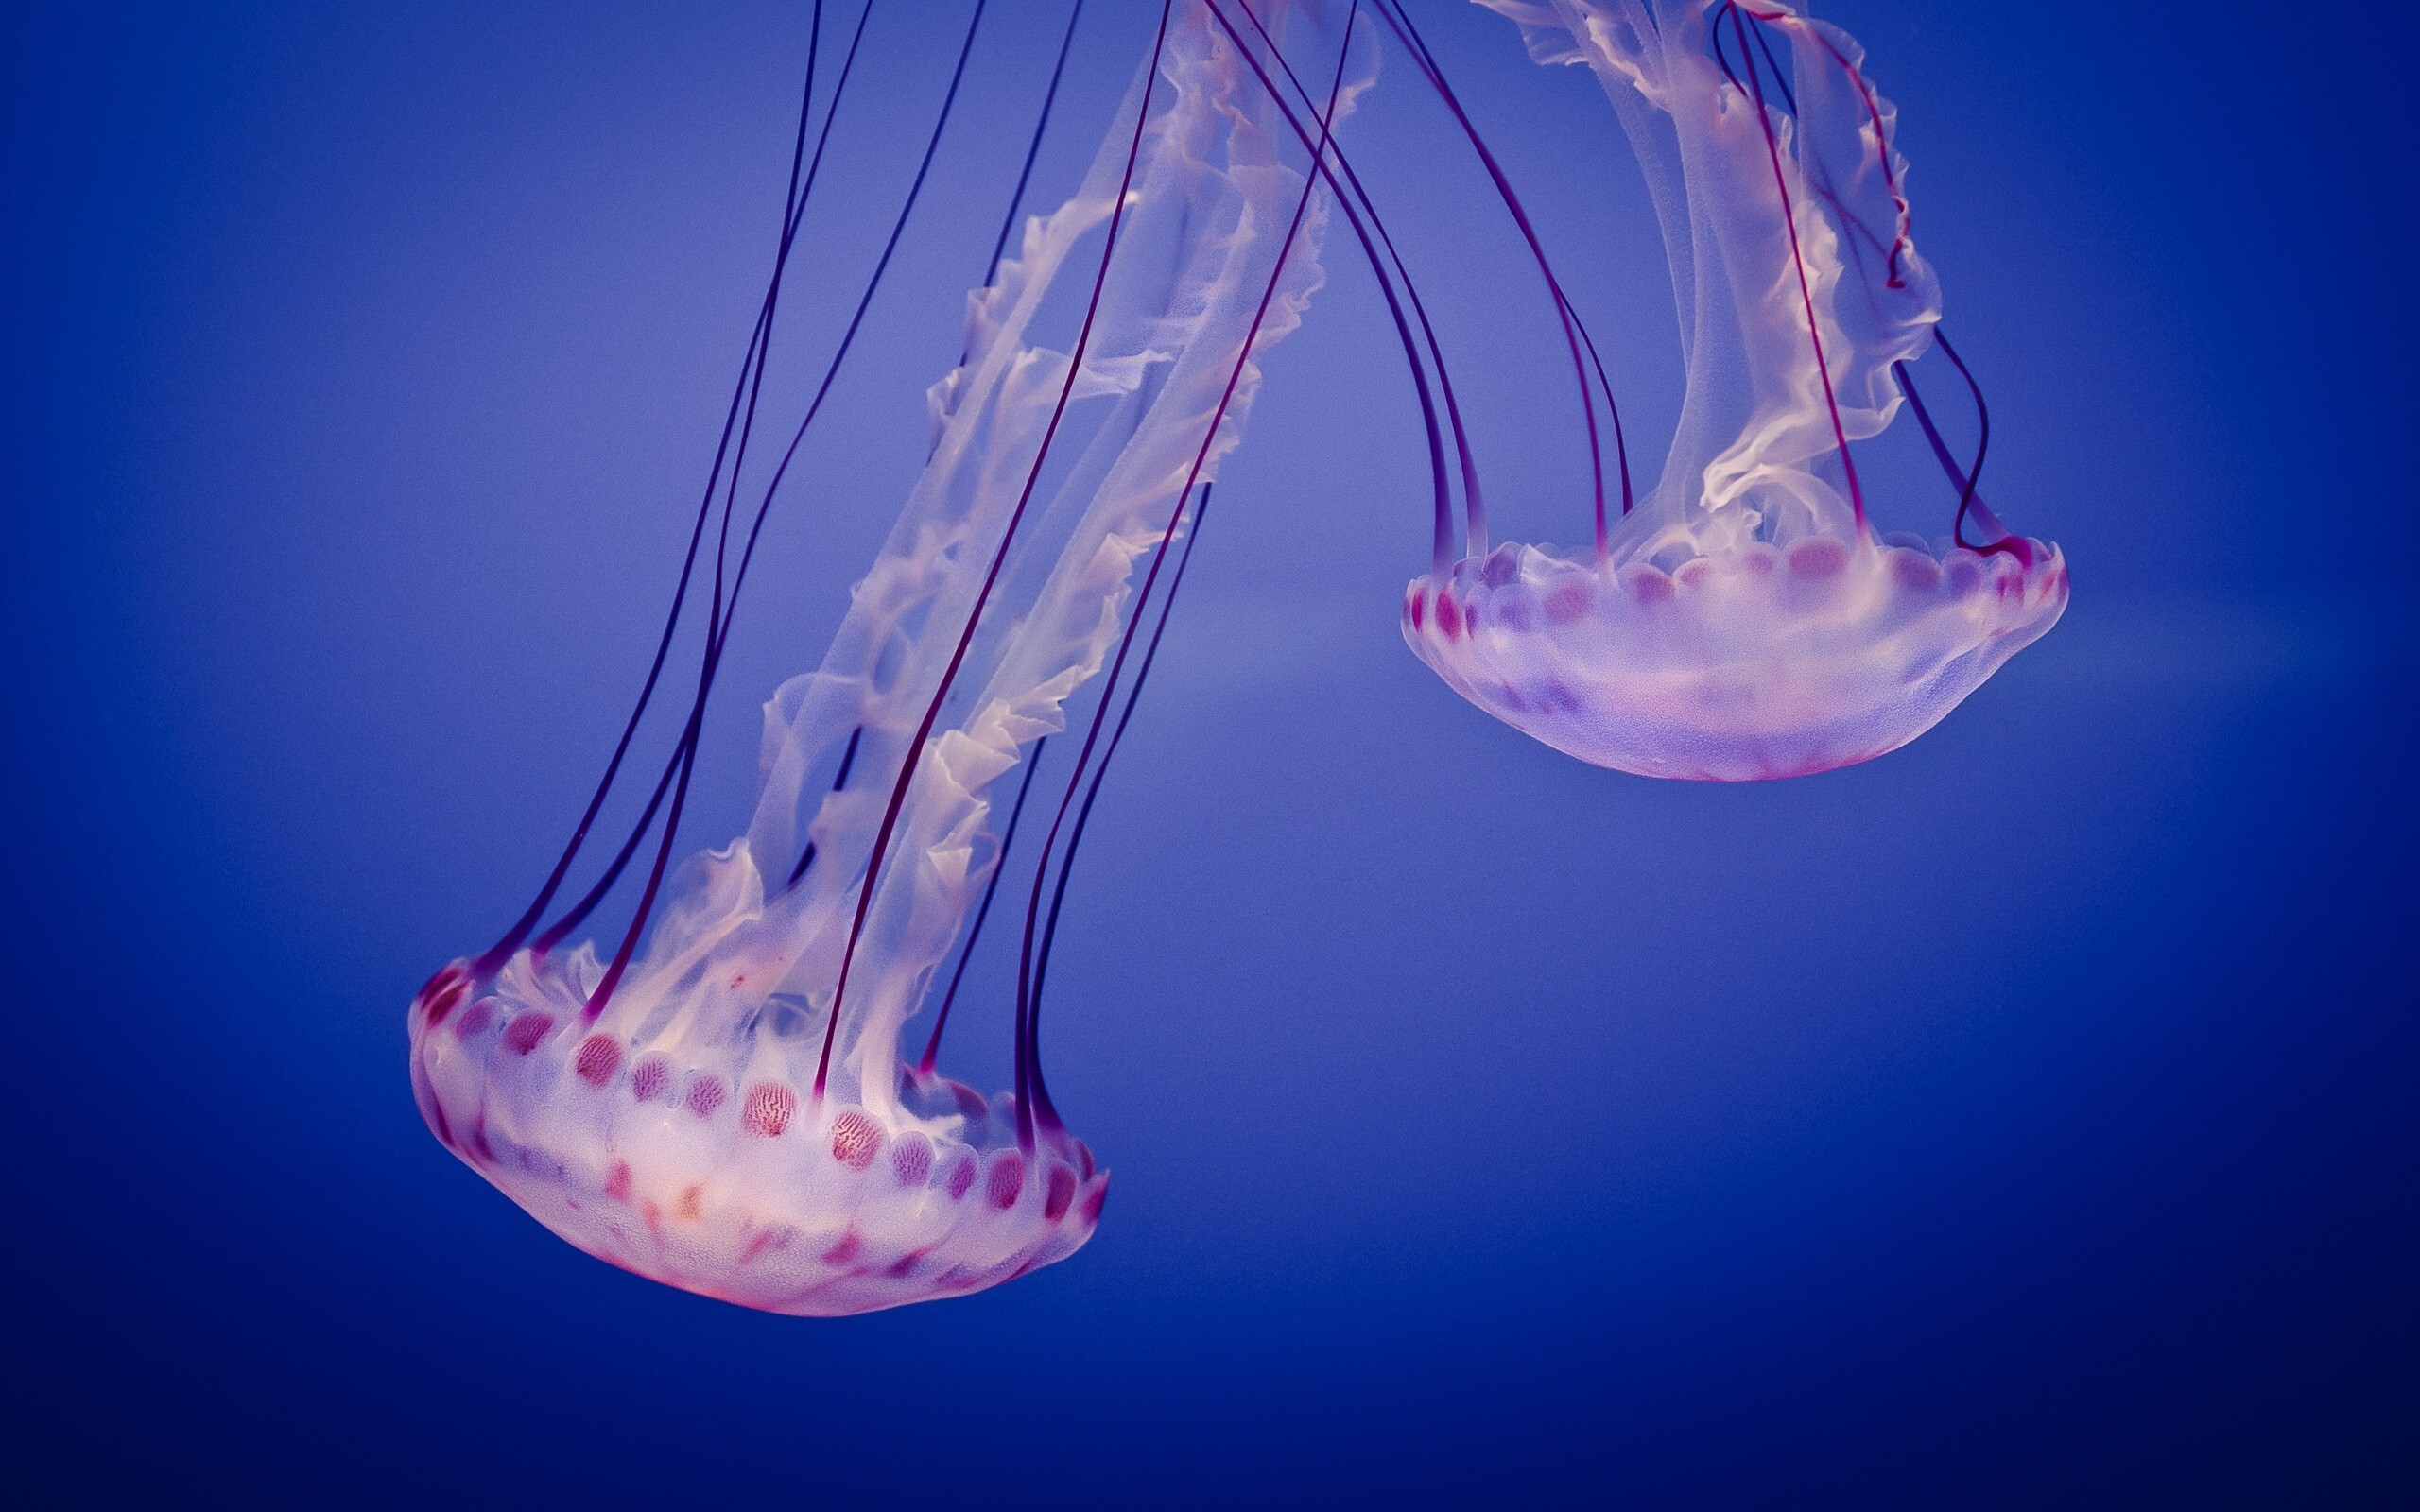 Glowing Jellyfish: Sea inhabitants, Extensible marginal tentacles studded with stinging cells. 2560x1600 HD Wallpaper.